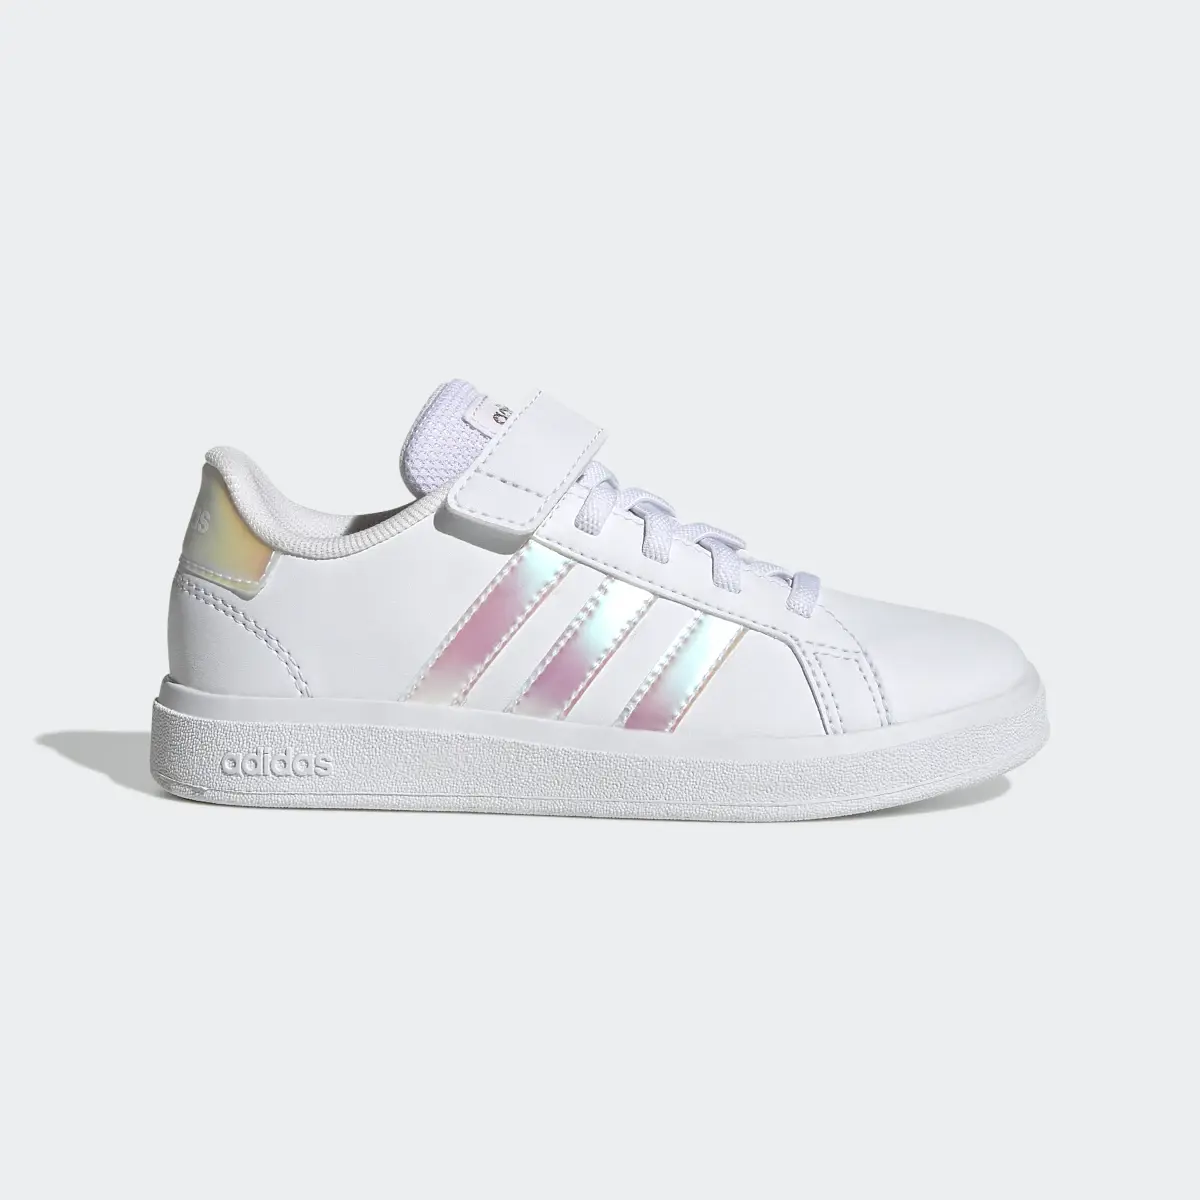 Adidas Grand Court Lifestyle Court Elastic Lace and Top Strap Shoes. 2